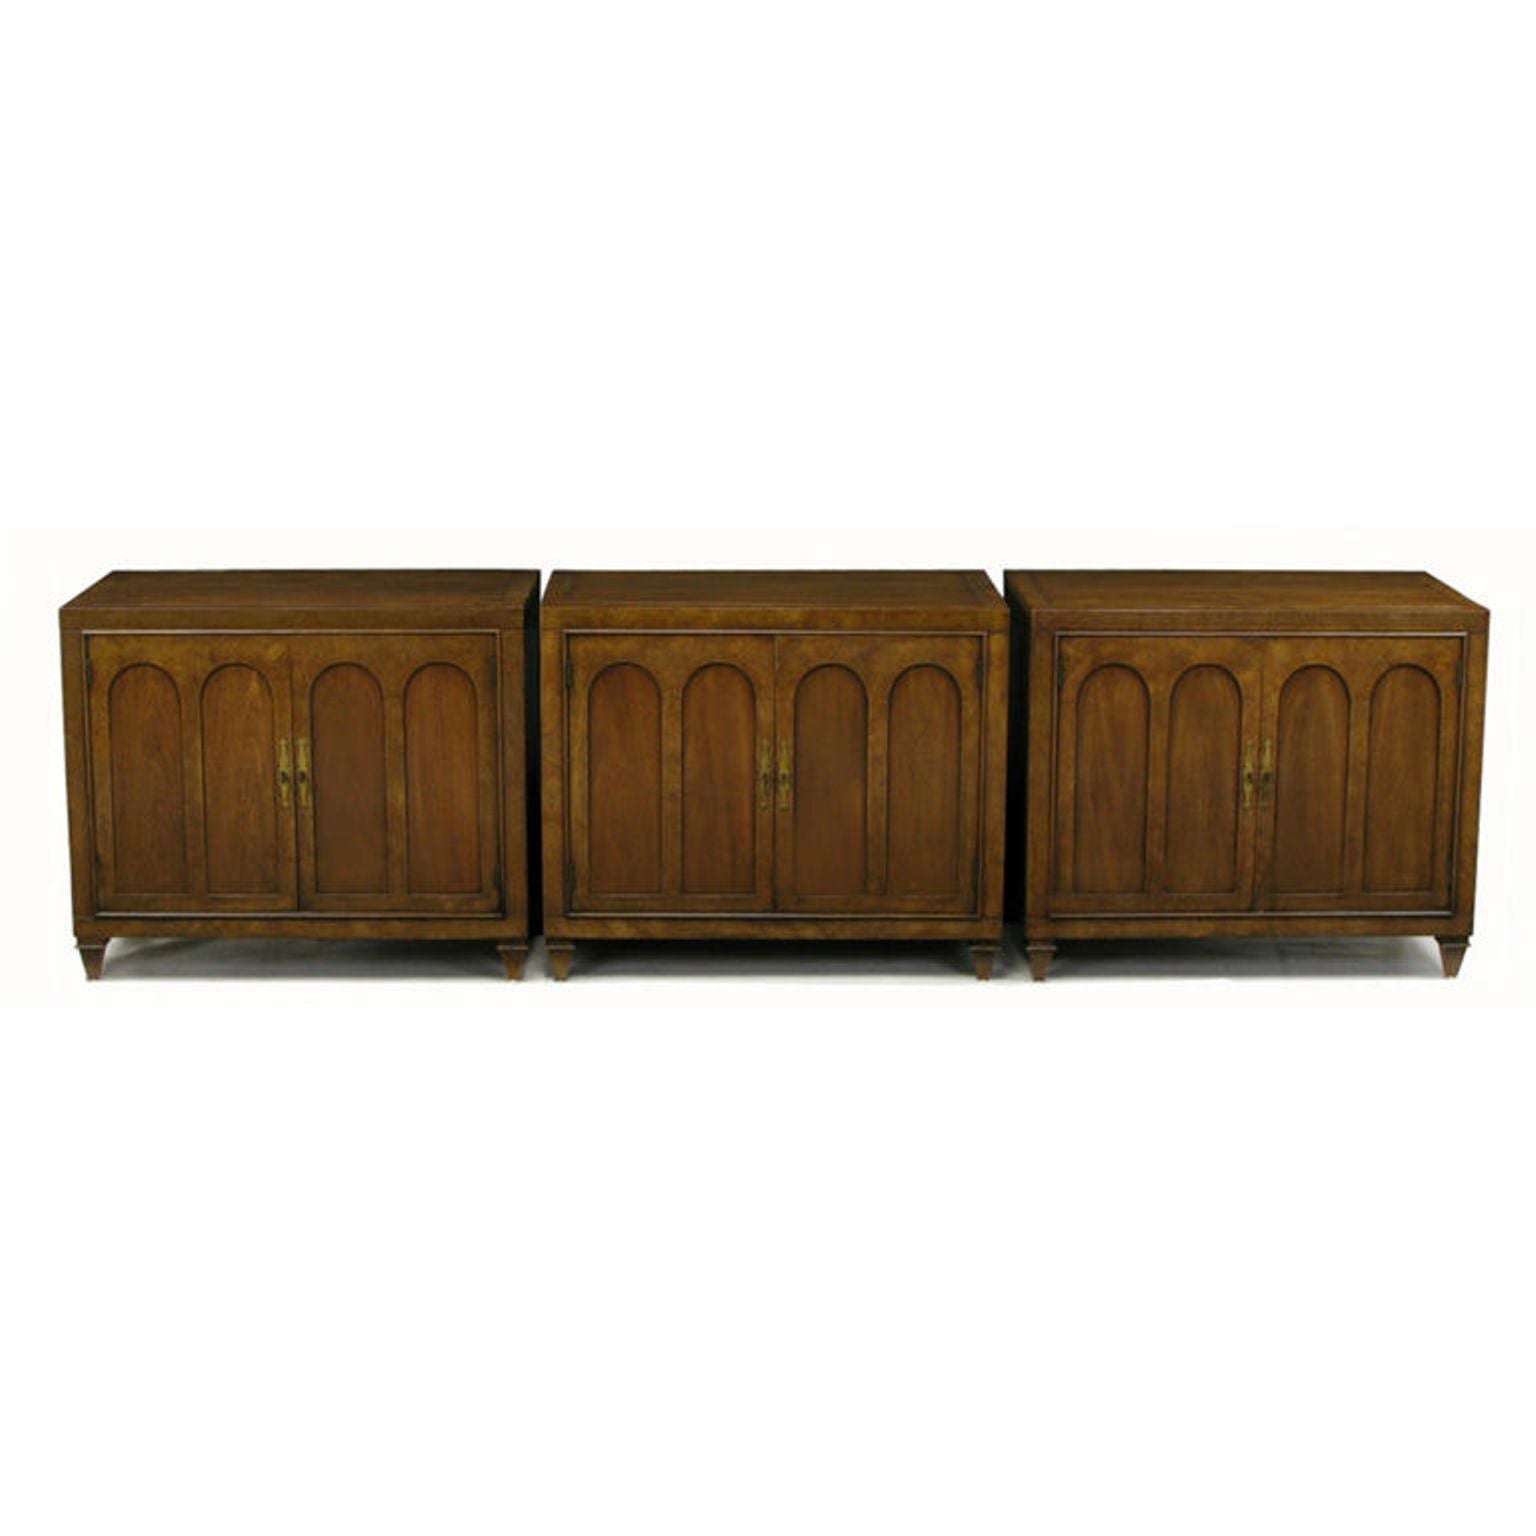 Trio of Mastercraft Burled and Walnut Colonnade Cabinets